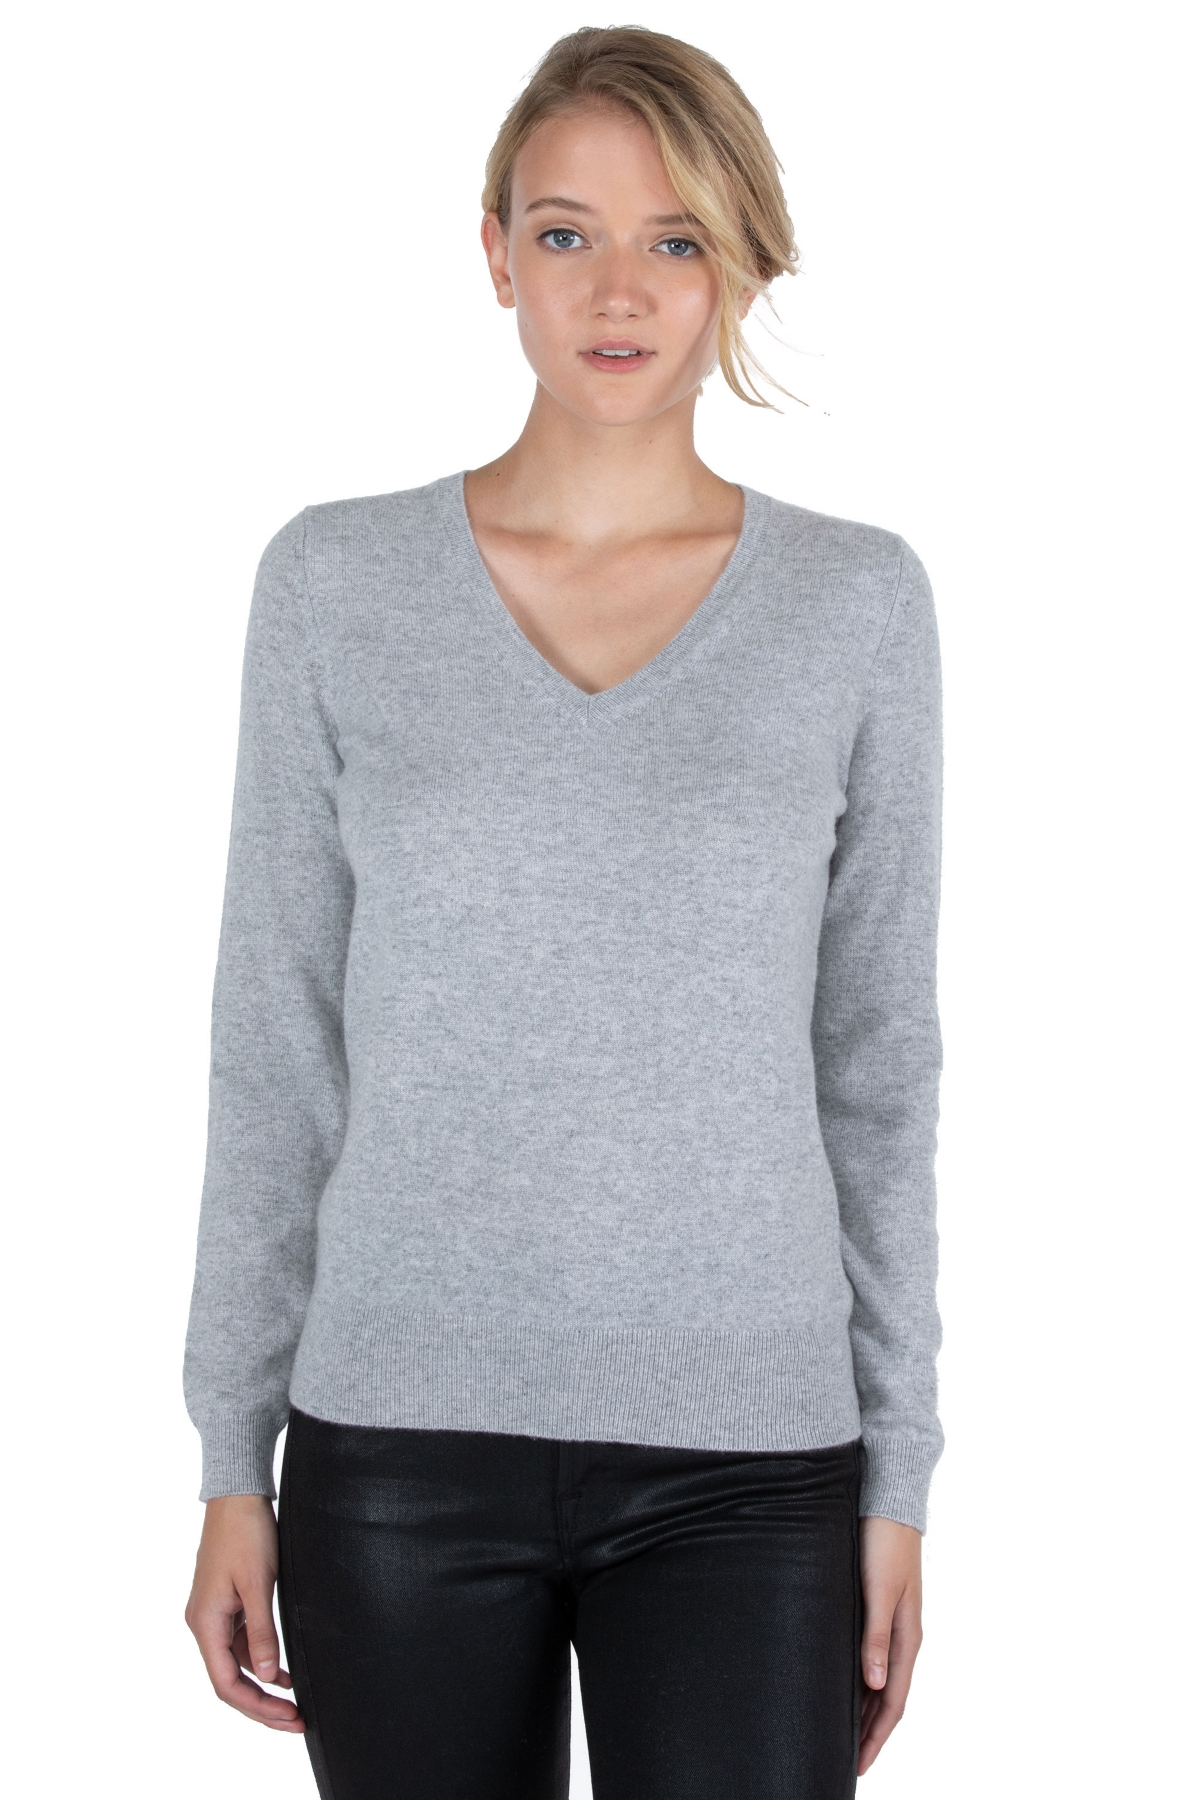 Women's 100% Pure Cashmere Long Sleeve Pullover V Neck Sweater (8160, Lime, Small ) - Orchid